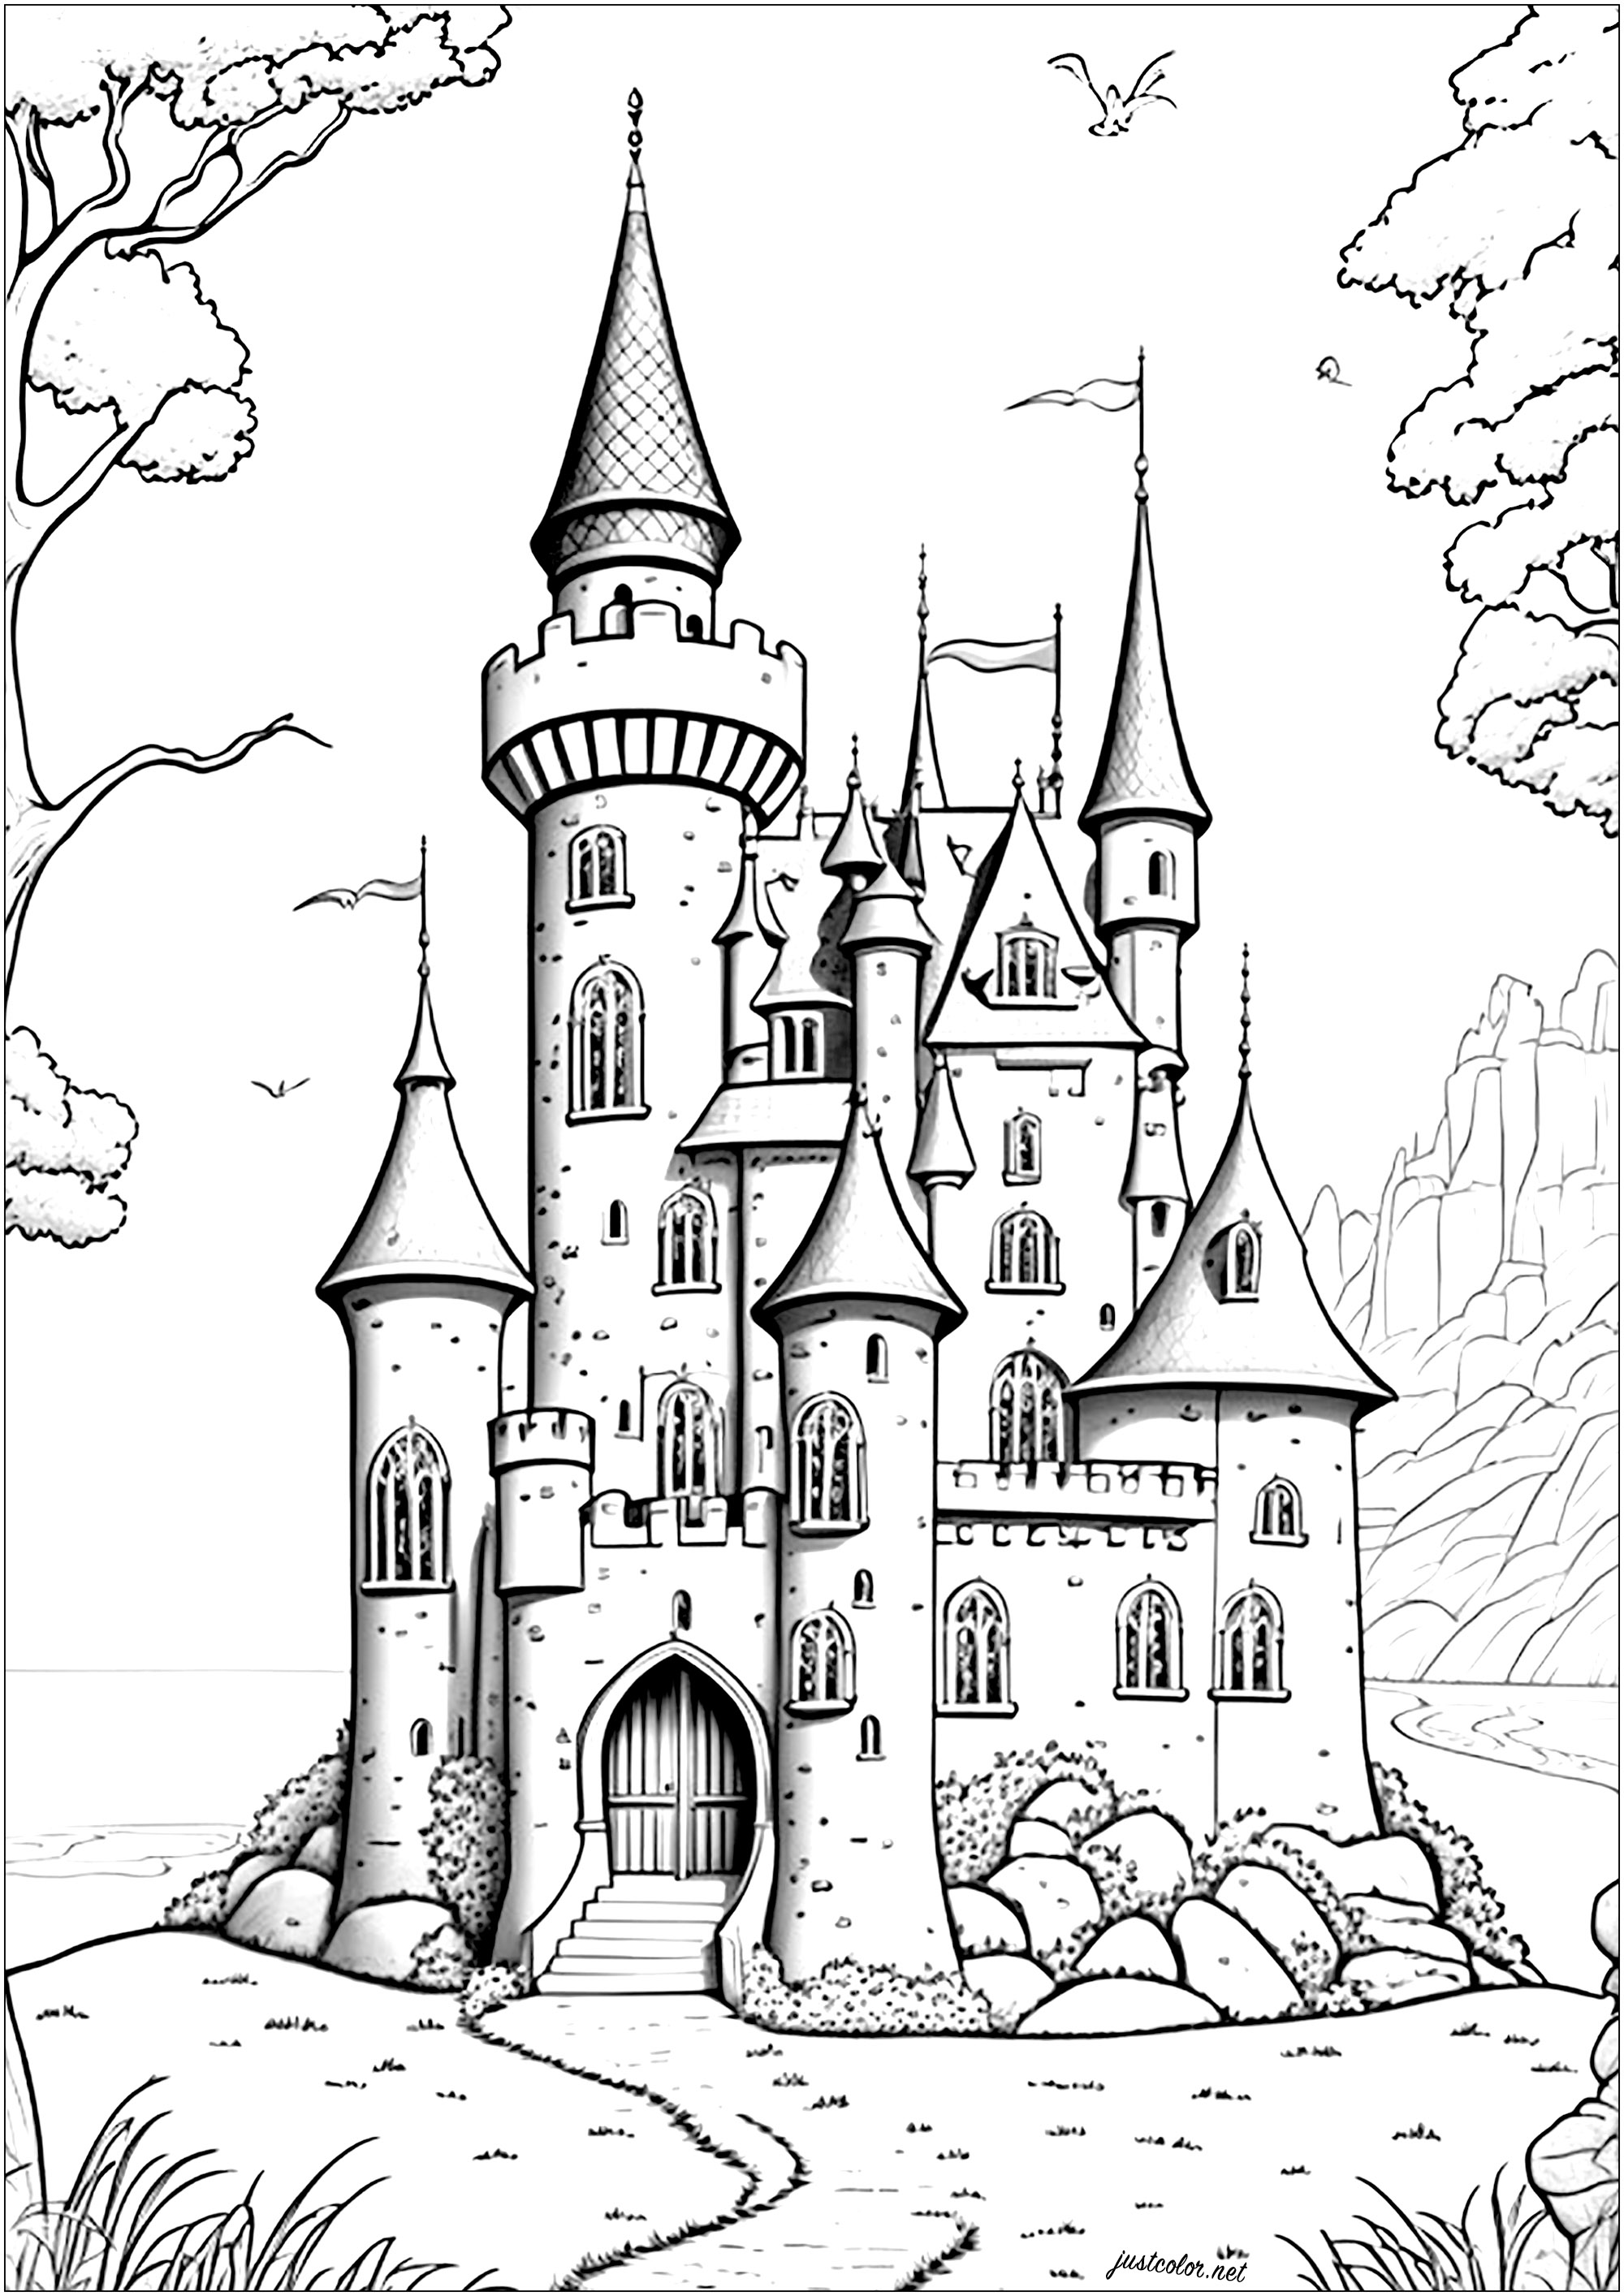 Majestic castle that rises to the sky, made of stone walls and pointed towers. The main door is large and imposing and each turret is topped by a flag that flies in the wind. Immerse yourself in the world of Disney's fairy tales with this beautiful and 100% original castle...